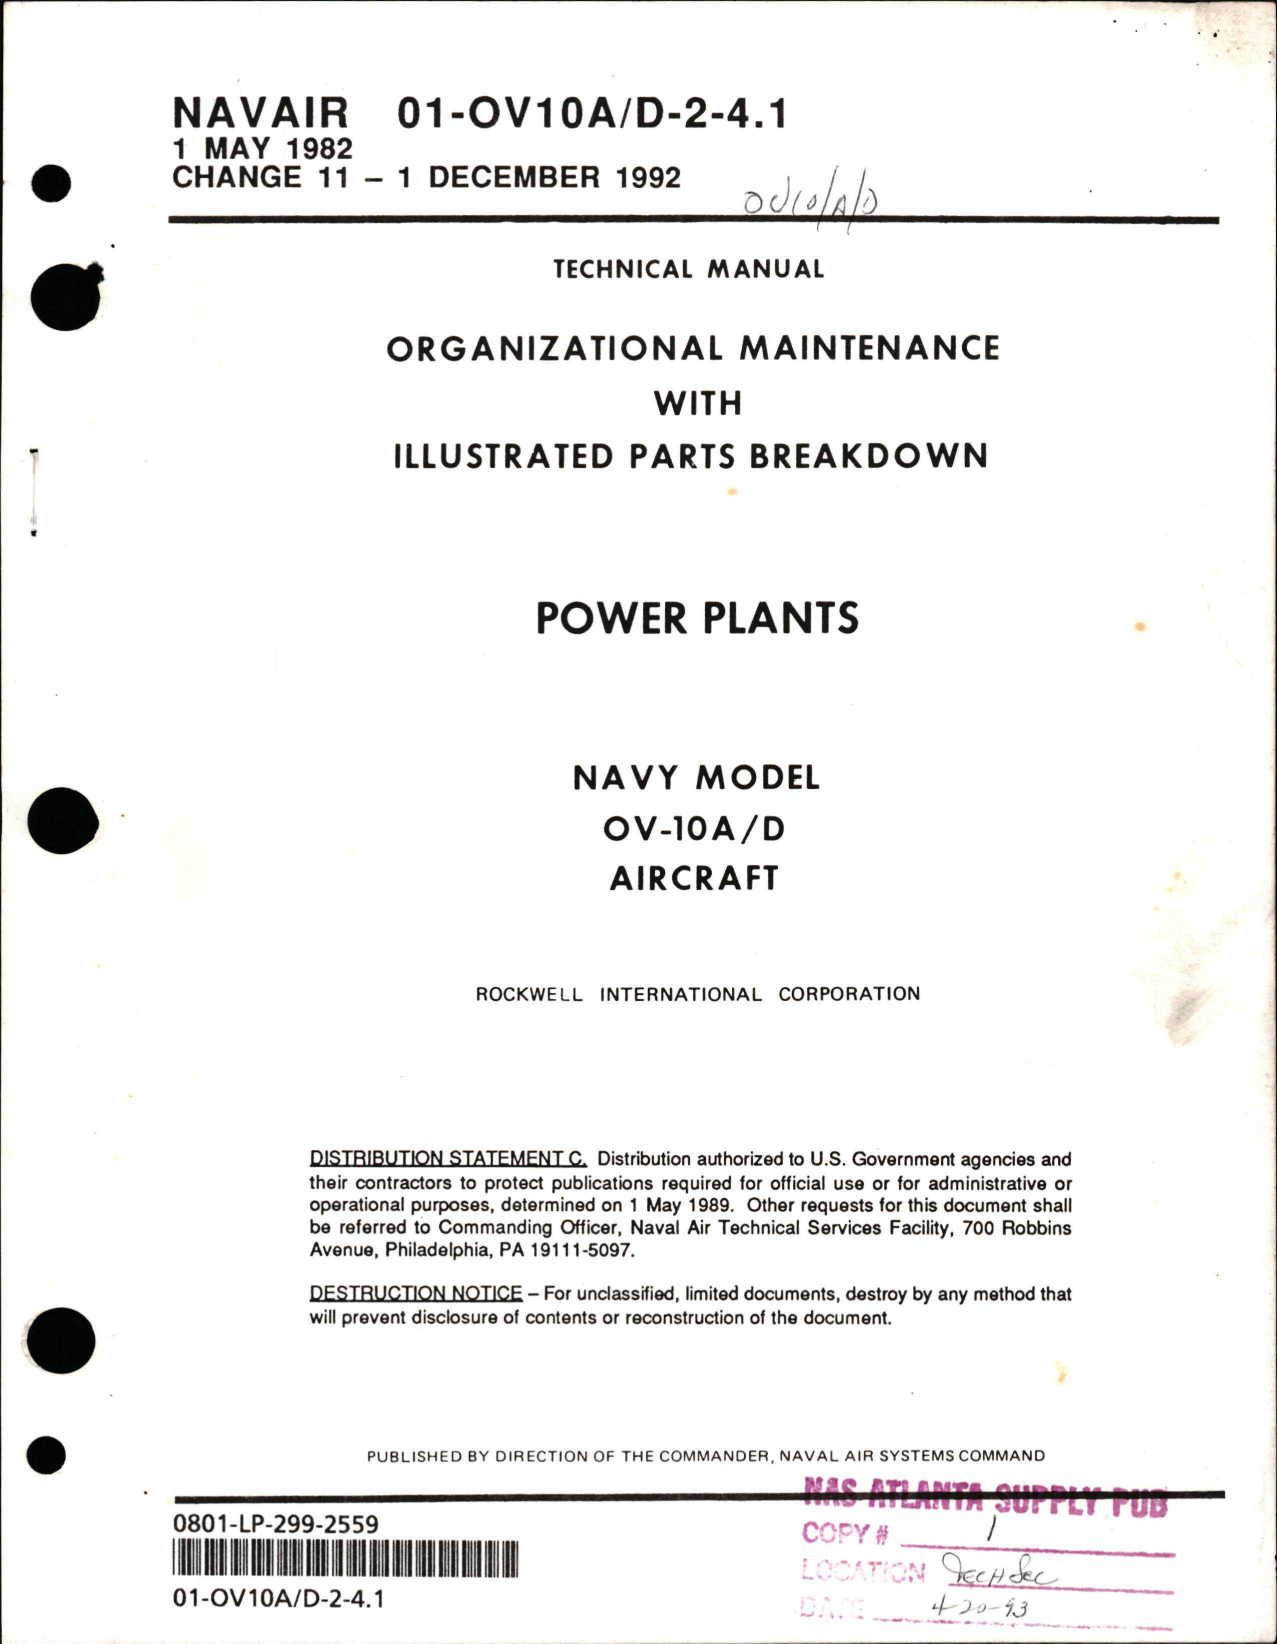 Sample page 1 from AirCorps Library document: Organizational Maintenance with Illustrated Parts Breakdown for Power Plants on the OV-10A/D